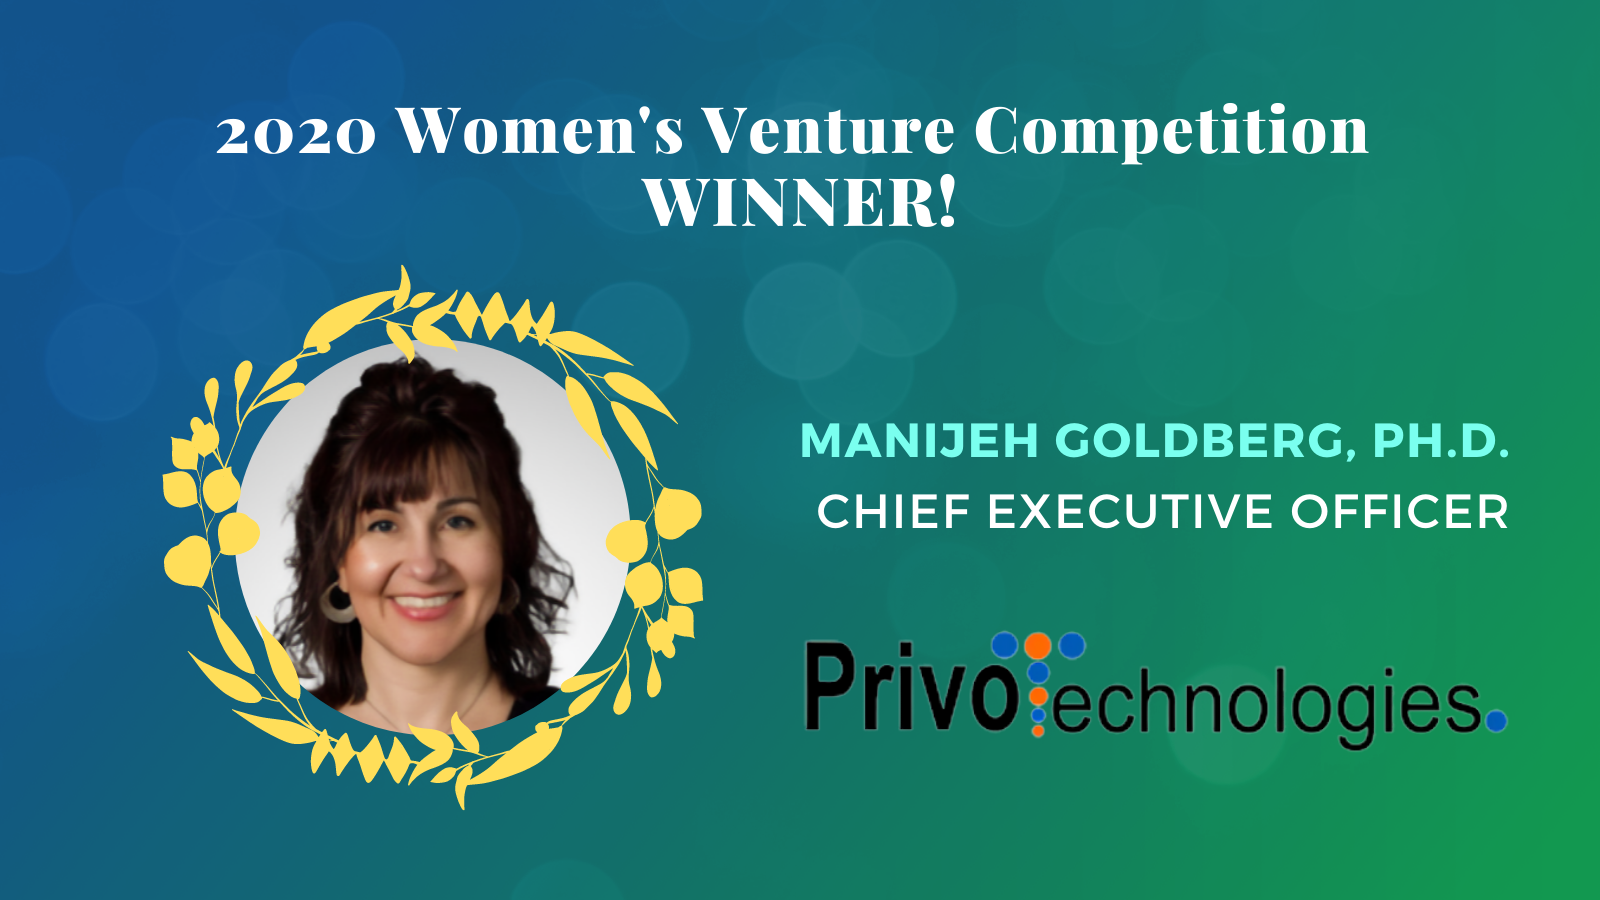 Winner of the AIM-HI Accelerator Fund’s Inaugural Women’s Venture Competition Announced